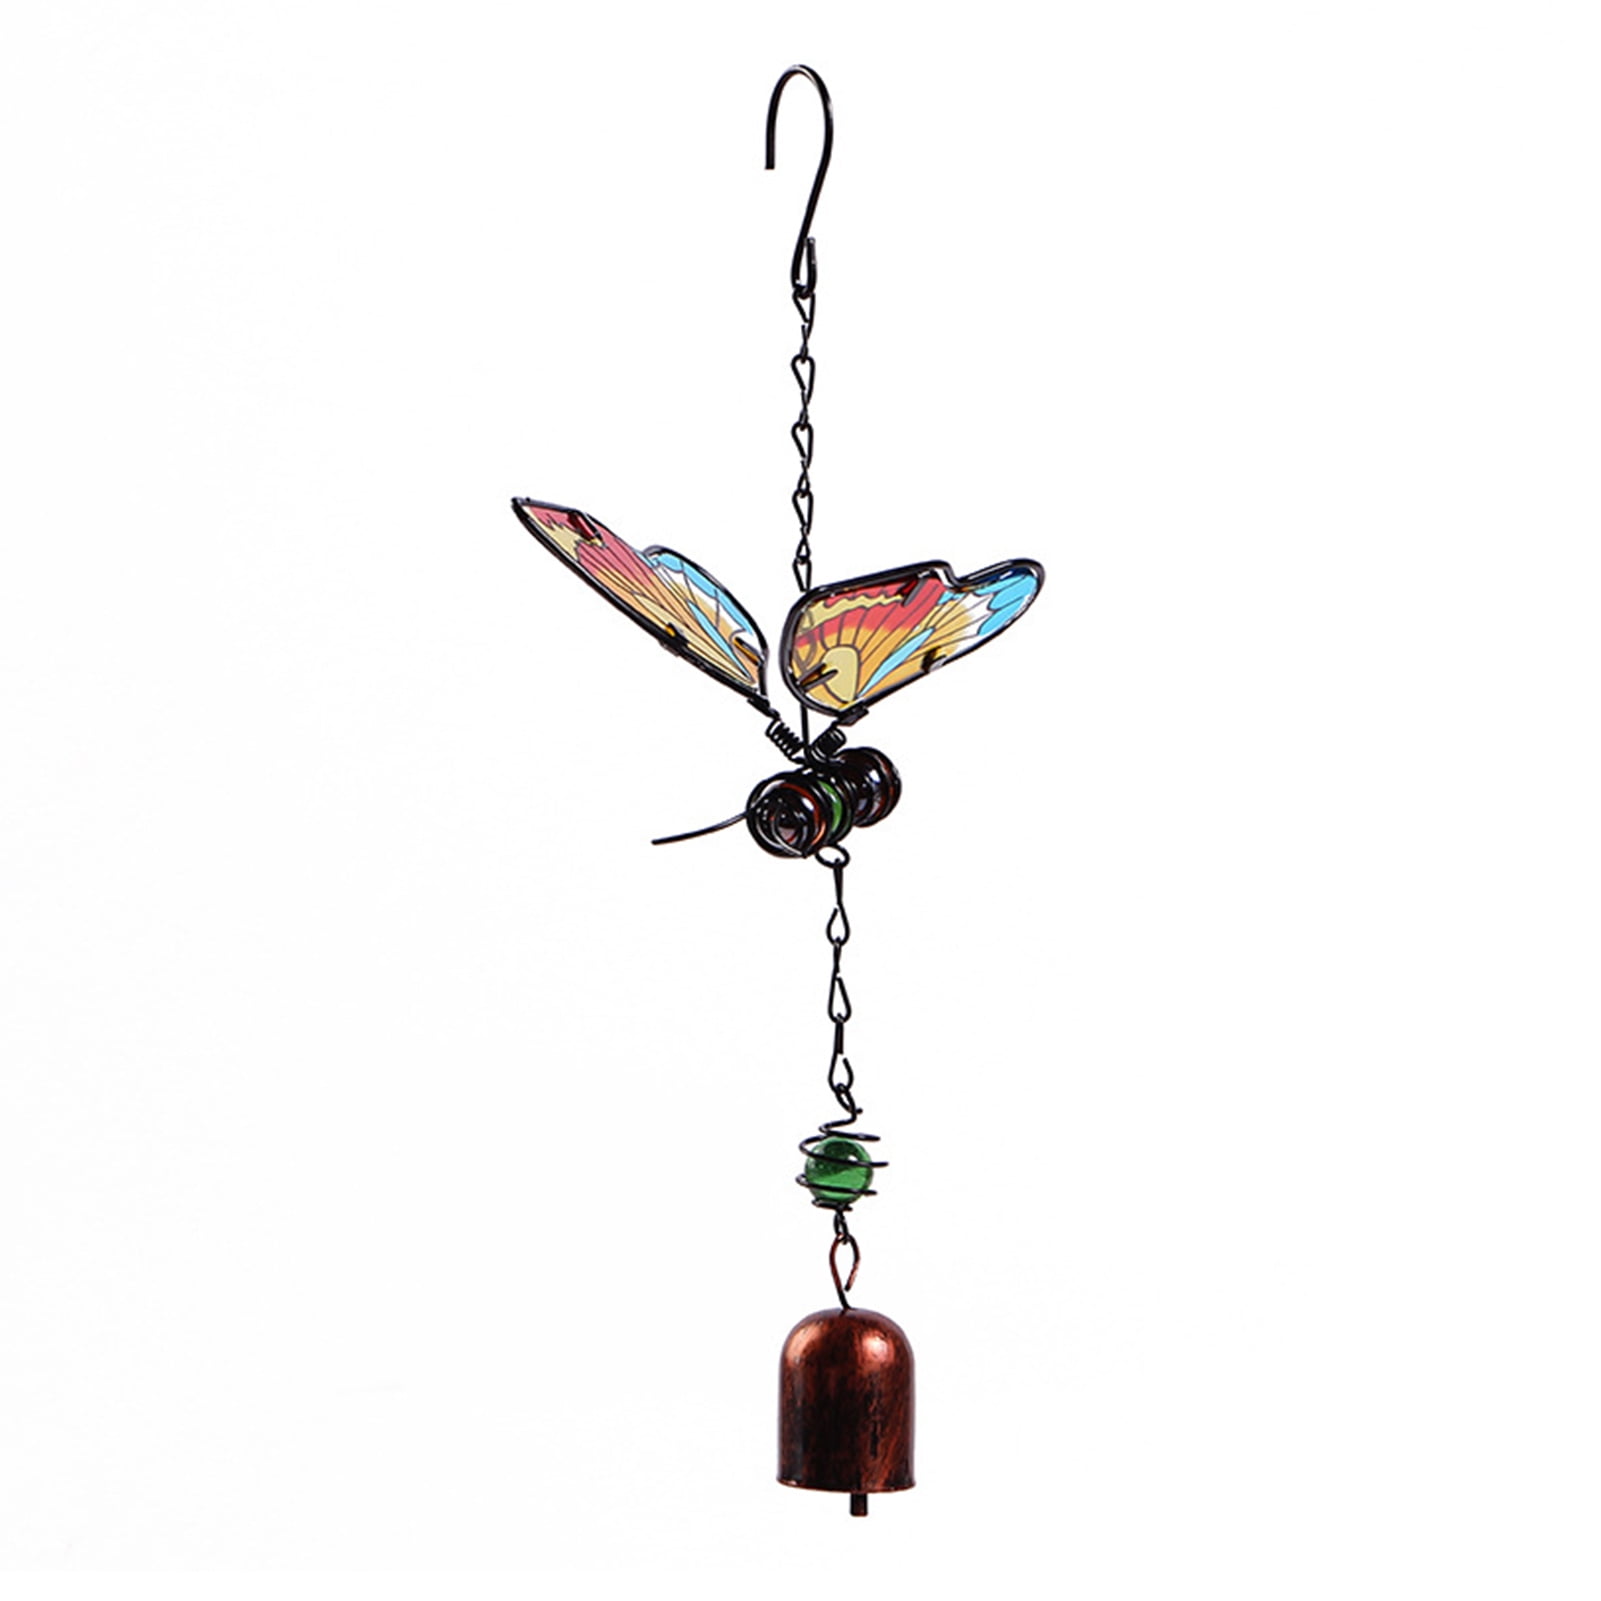 Details about   70cm Butterfly Bell Wind Chimes Creative Home Yard Garden Hanging Window Decor 